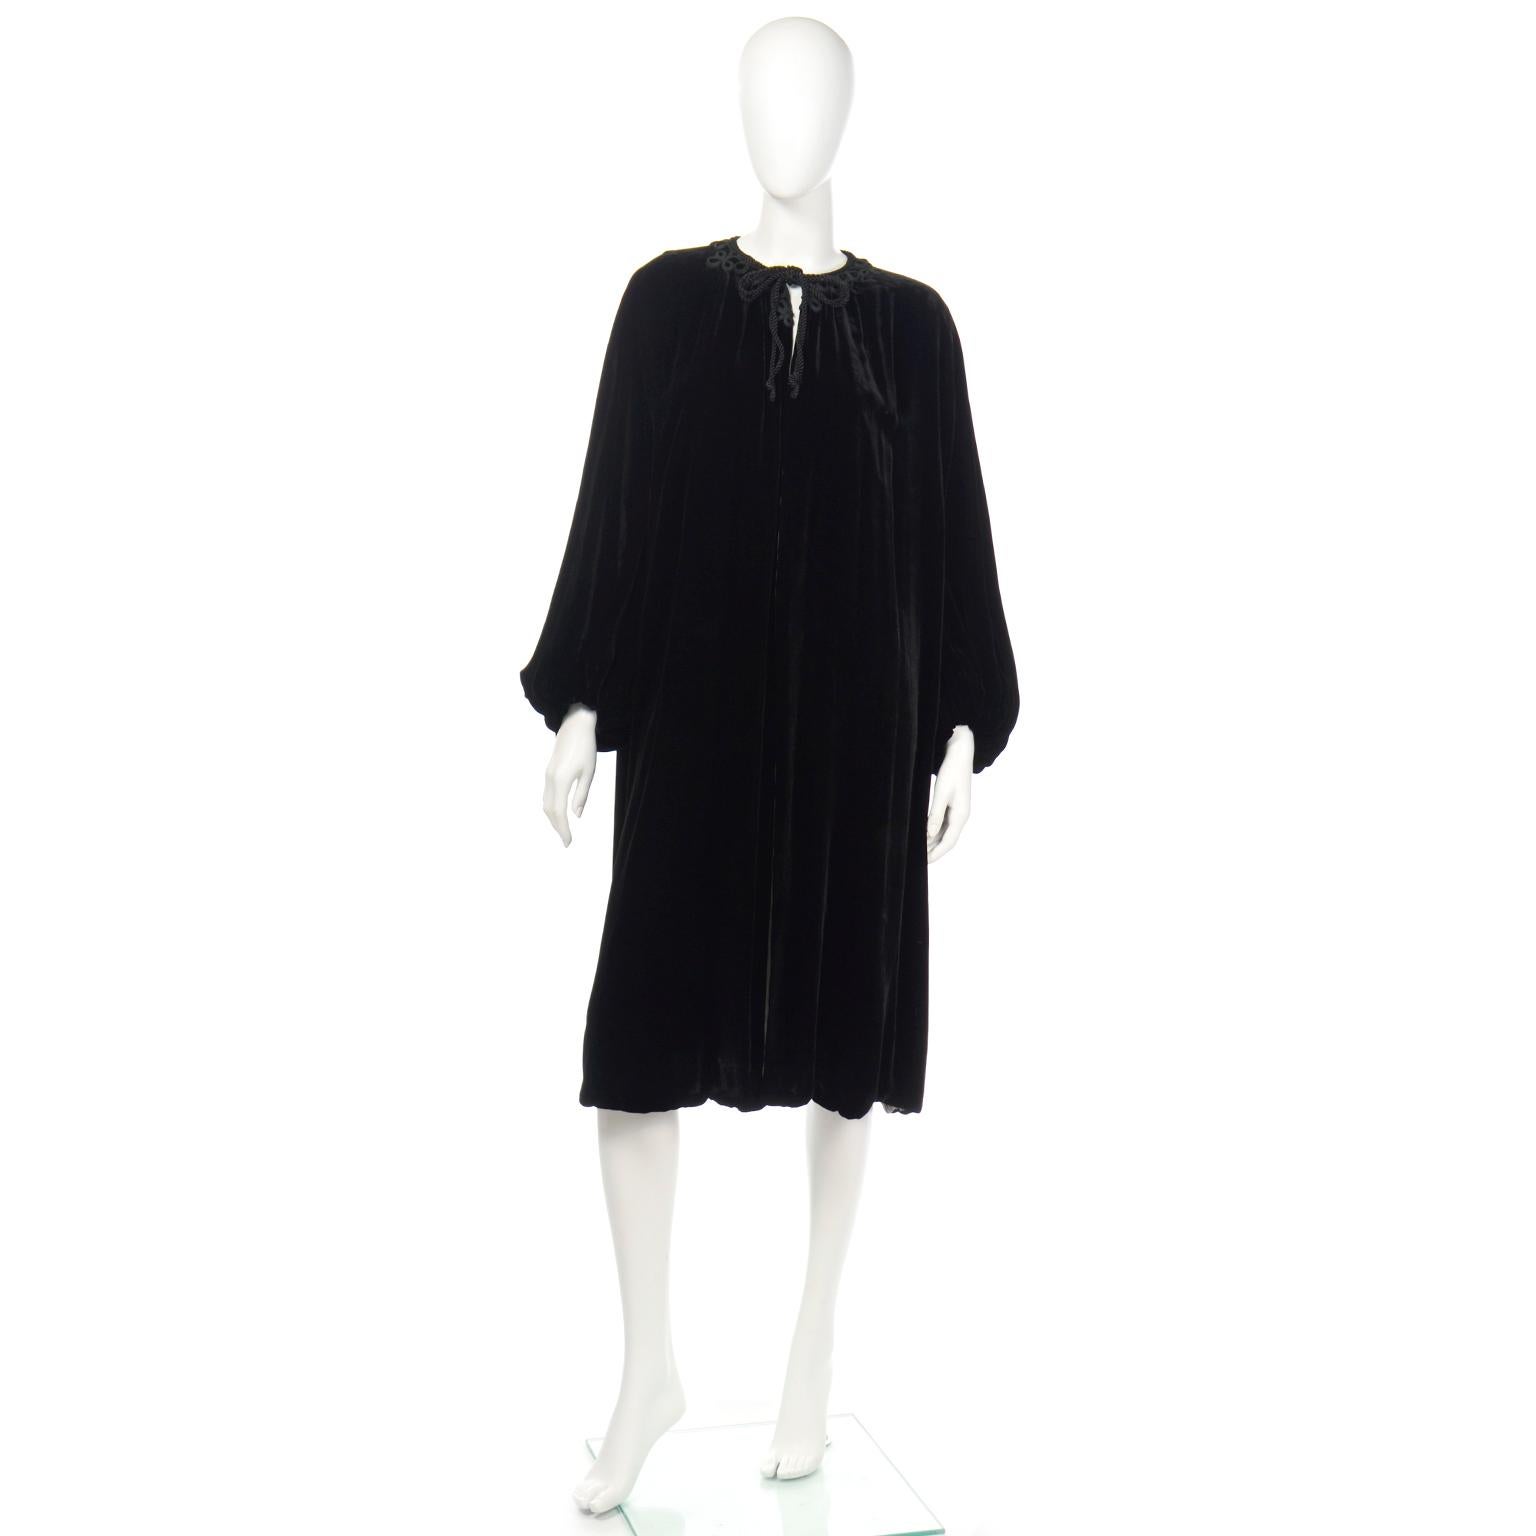 This is a luxurious silk velvet 1920's evening coat with an open front and black rope tie at the neck. We especially love the beautiful soutache trim. The pretty bubble slight balloon sleeves have elastic cuffs, and add give the piece lovely